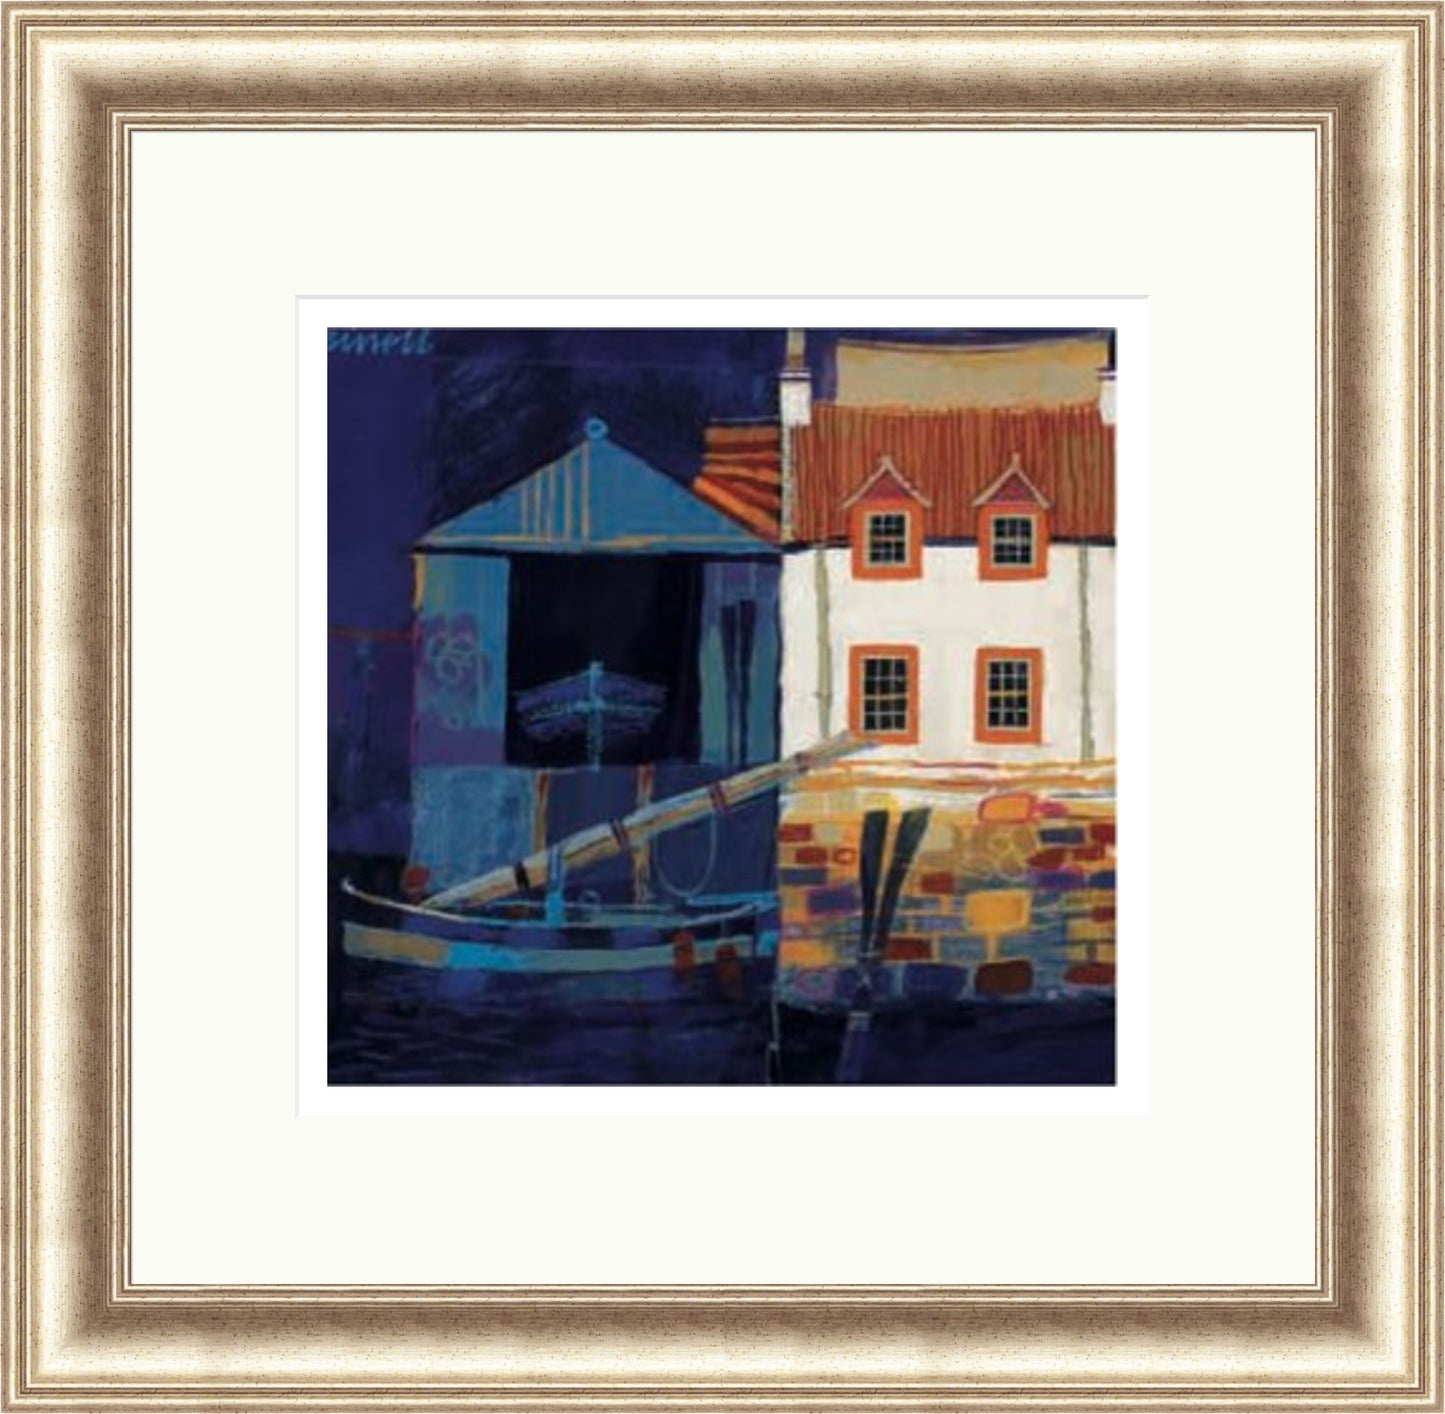 Boat House (Limited Edition) by George Birrell